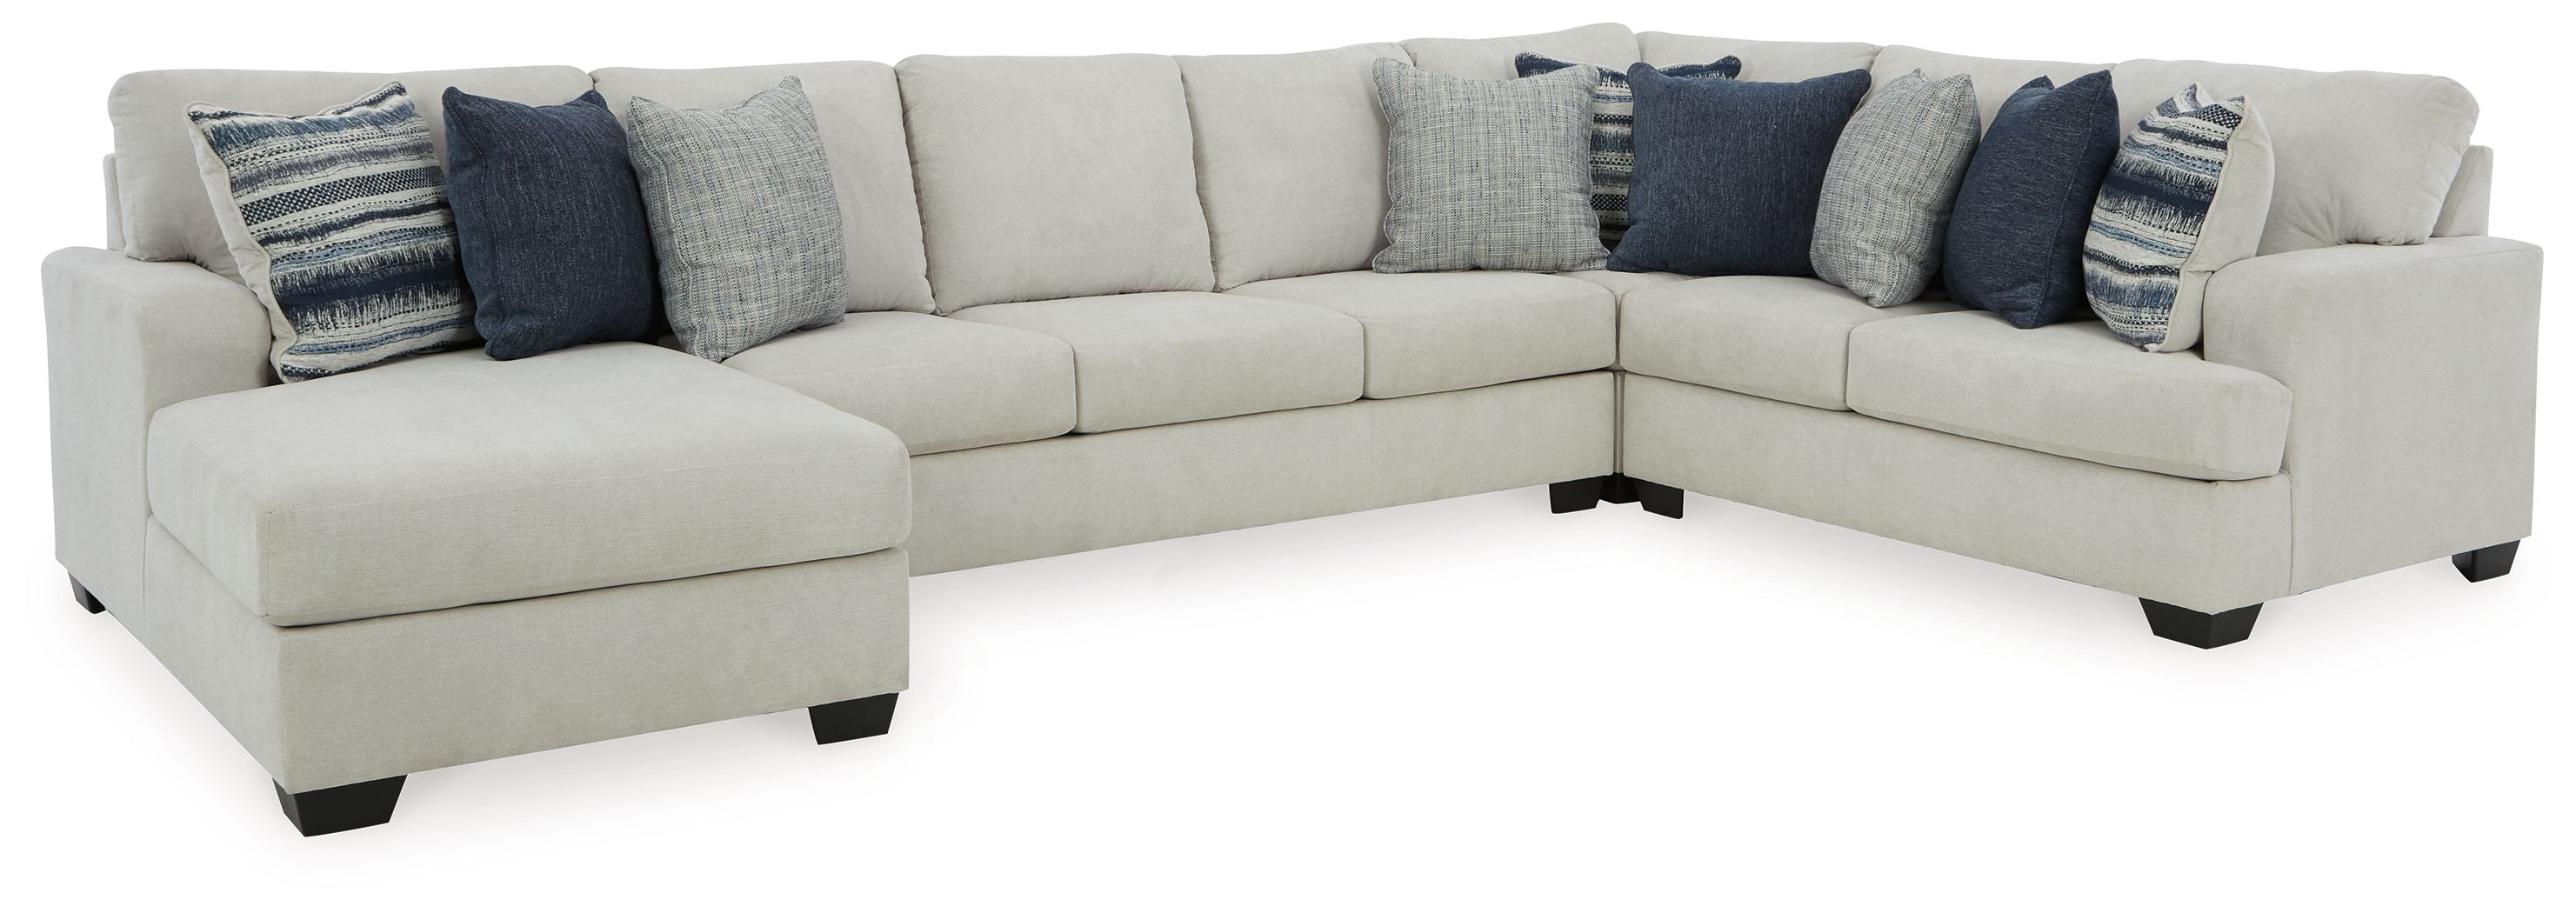 Lowder Beige U Shaped Sectional - Soft Fabric, Modern-Stationary Sectionals-American Furniture Outlet